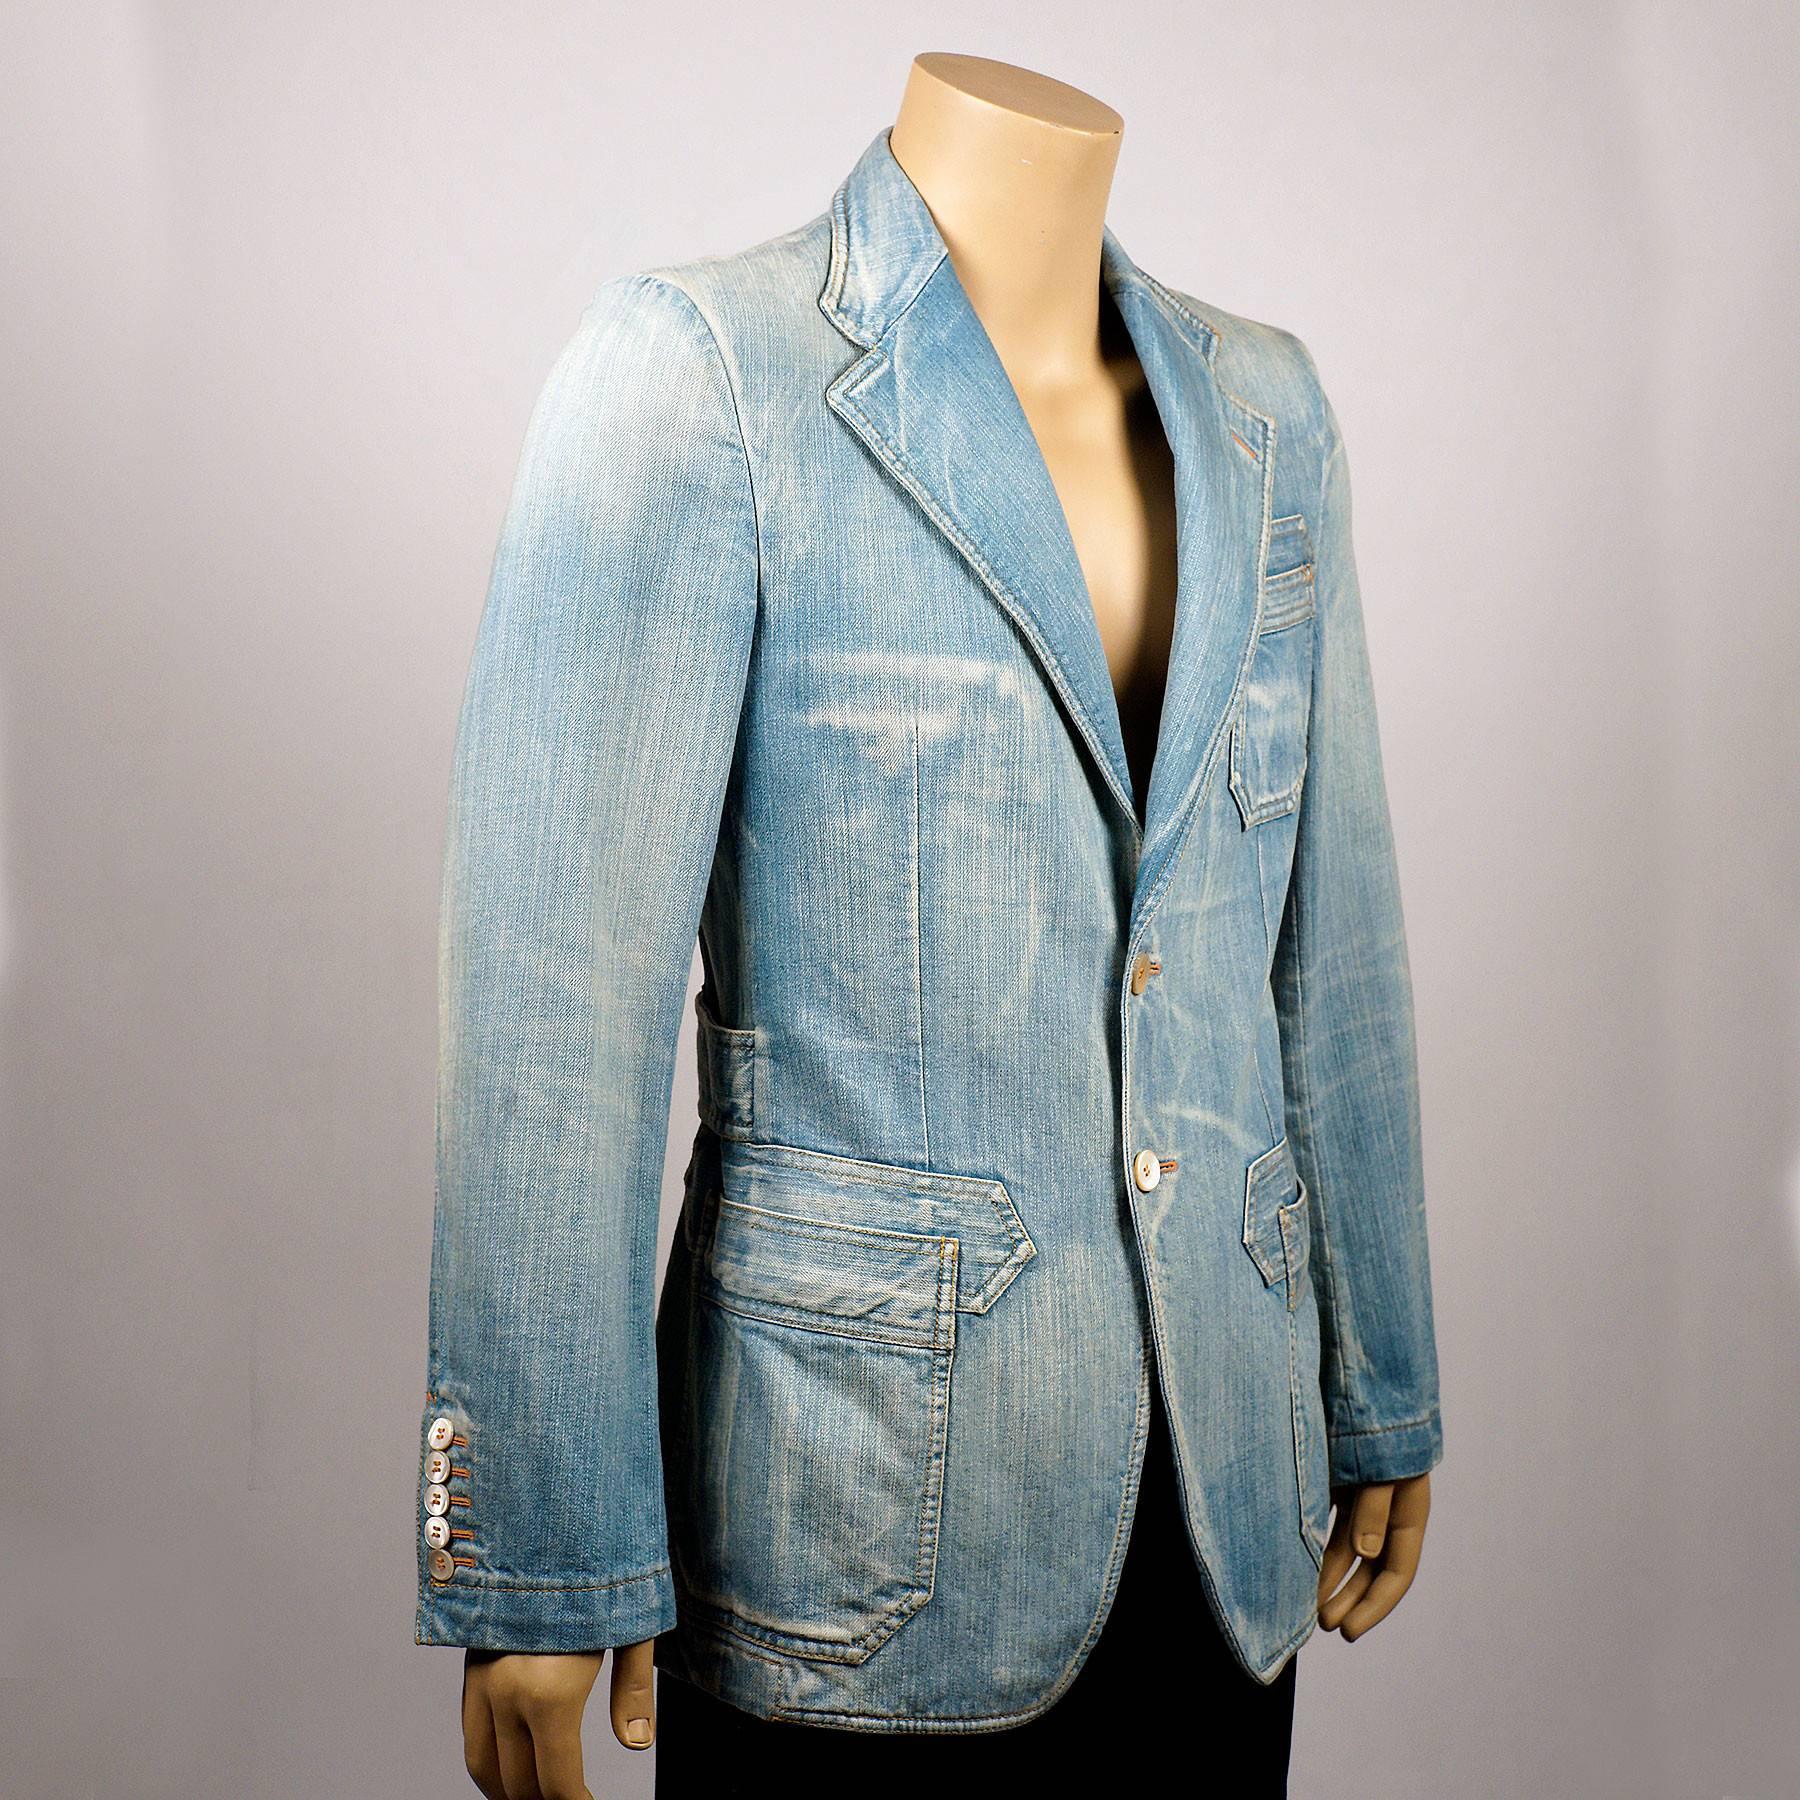 Tom Ford designed Gucci tailored distressed denim jacket with 3 front pockets, a 2 button front closure and 2 button adjustable waist band.

Made In Italy.  

Size: 48 R
-Measurements-
Sleeve length: 25"
Chest: 34"
Length: 29"


Good